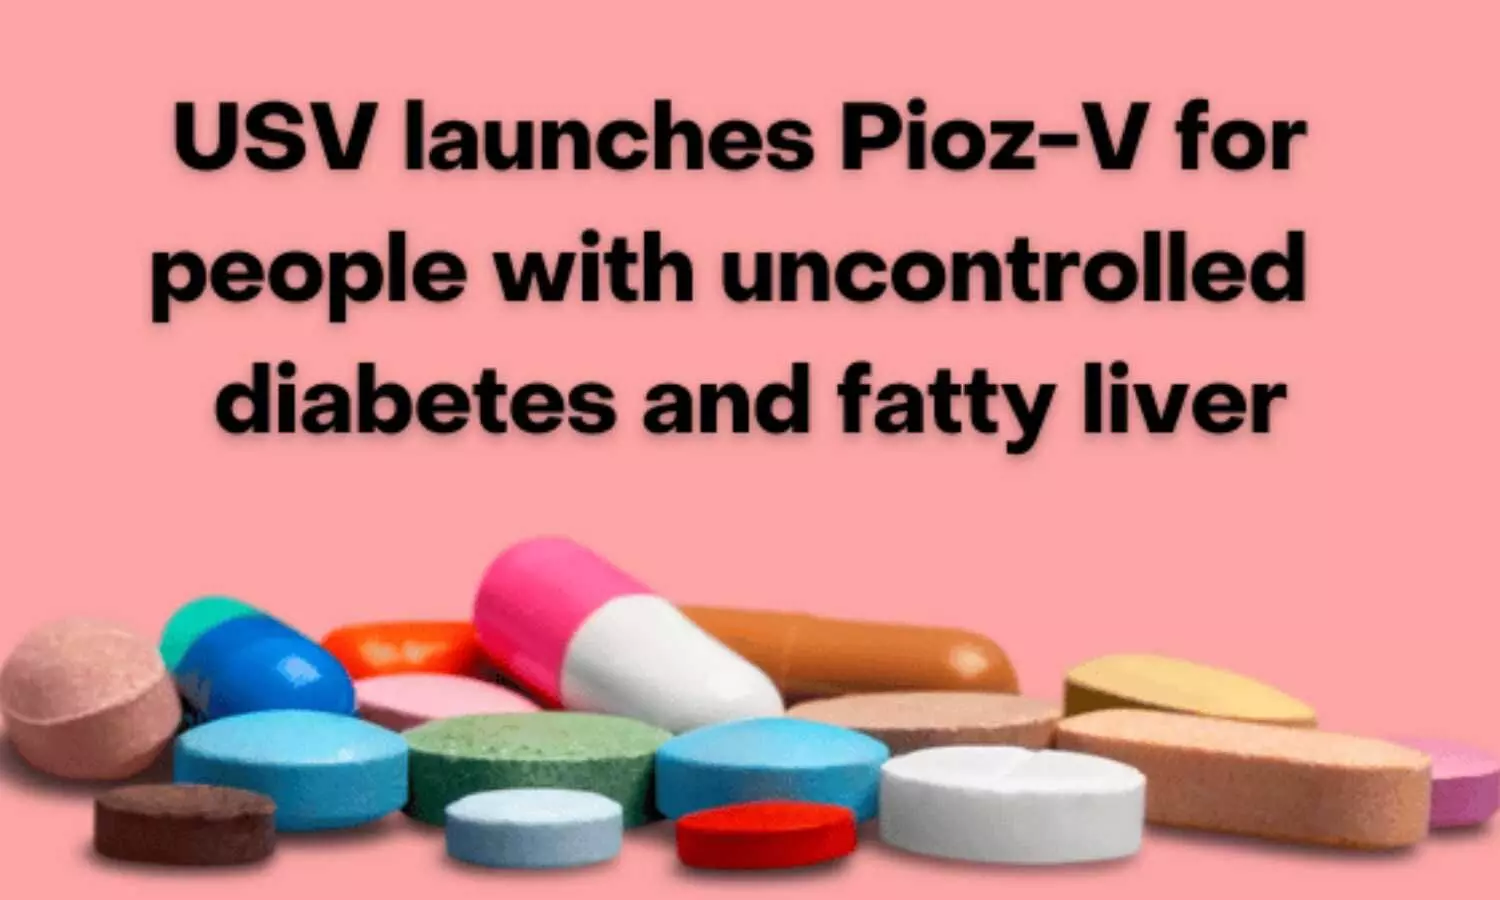 USV launches Pioz-V for uncontrolled diabetic patients with fatty liver